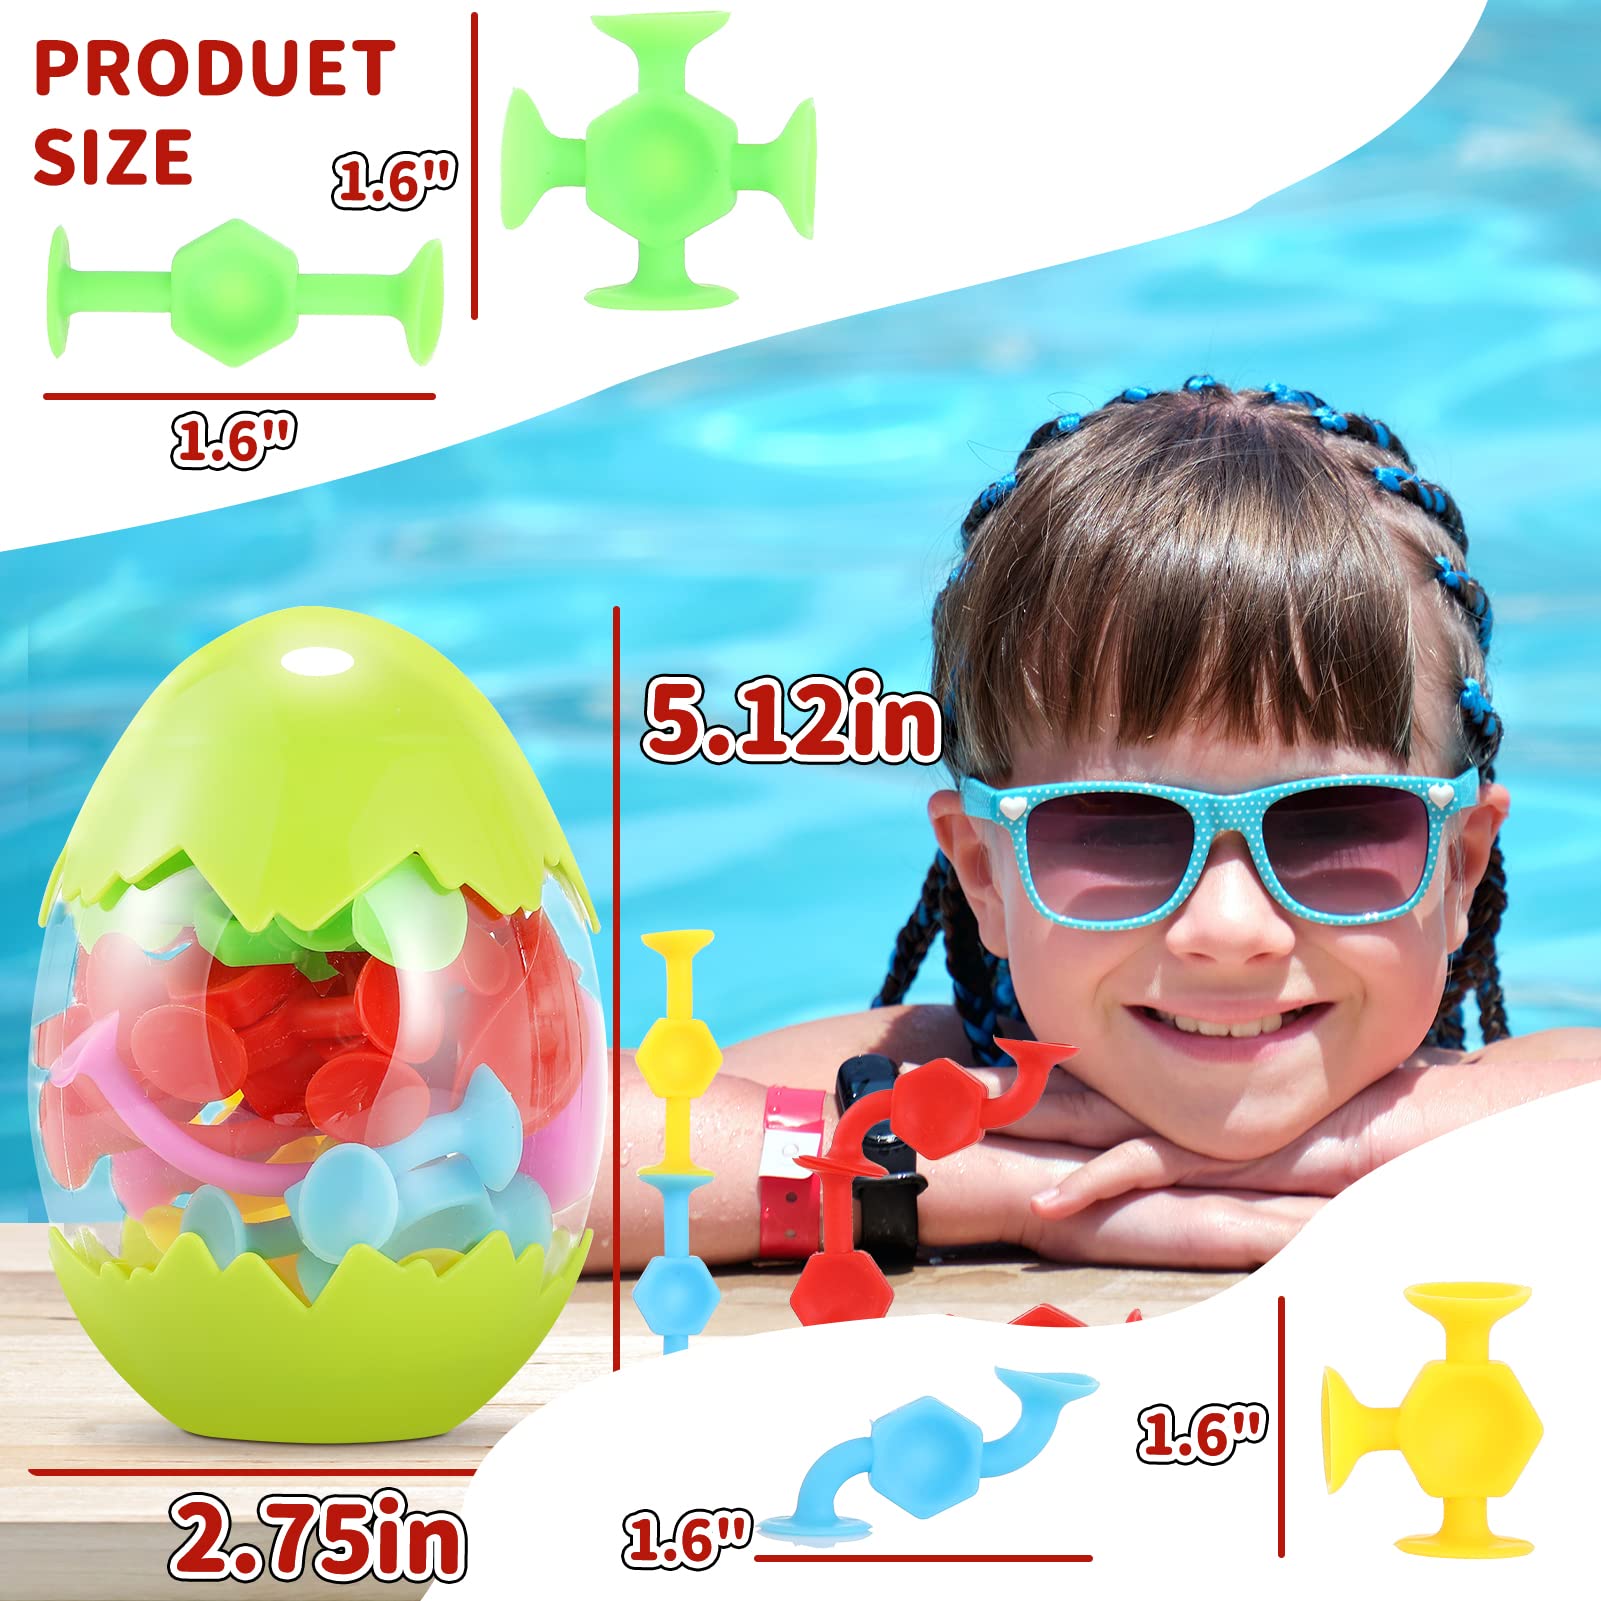 Suction Toys Bath Toy Set - 24 pcs Slicone Sucker Toys for Kids, Window Toys with Storage, Good for Autism/ADD/ADHD.